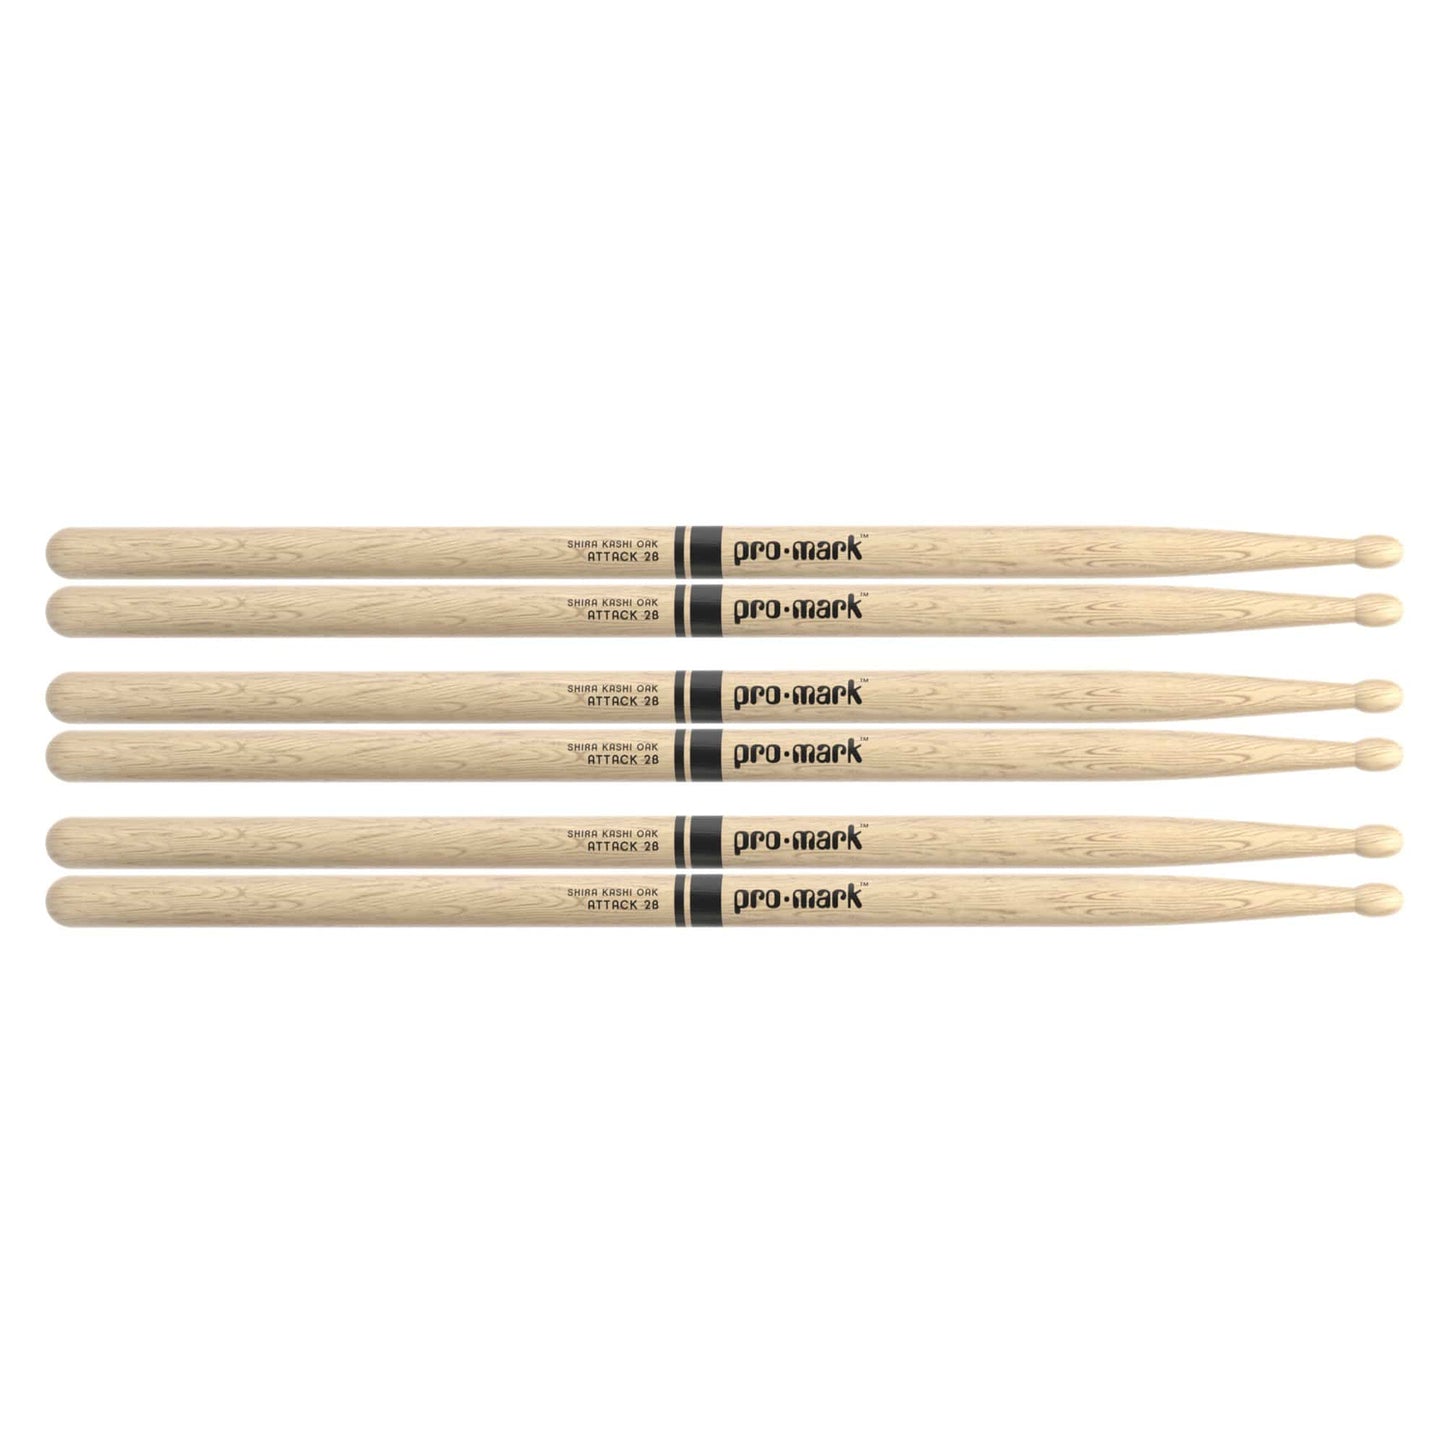 Promark Japanese White Oak 2B Wood Tip Drum Sticks (3 Pair Bundle) Drums and Percussion / Parts and Accessories / Drum Sticks and Mallets